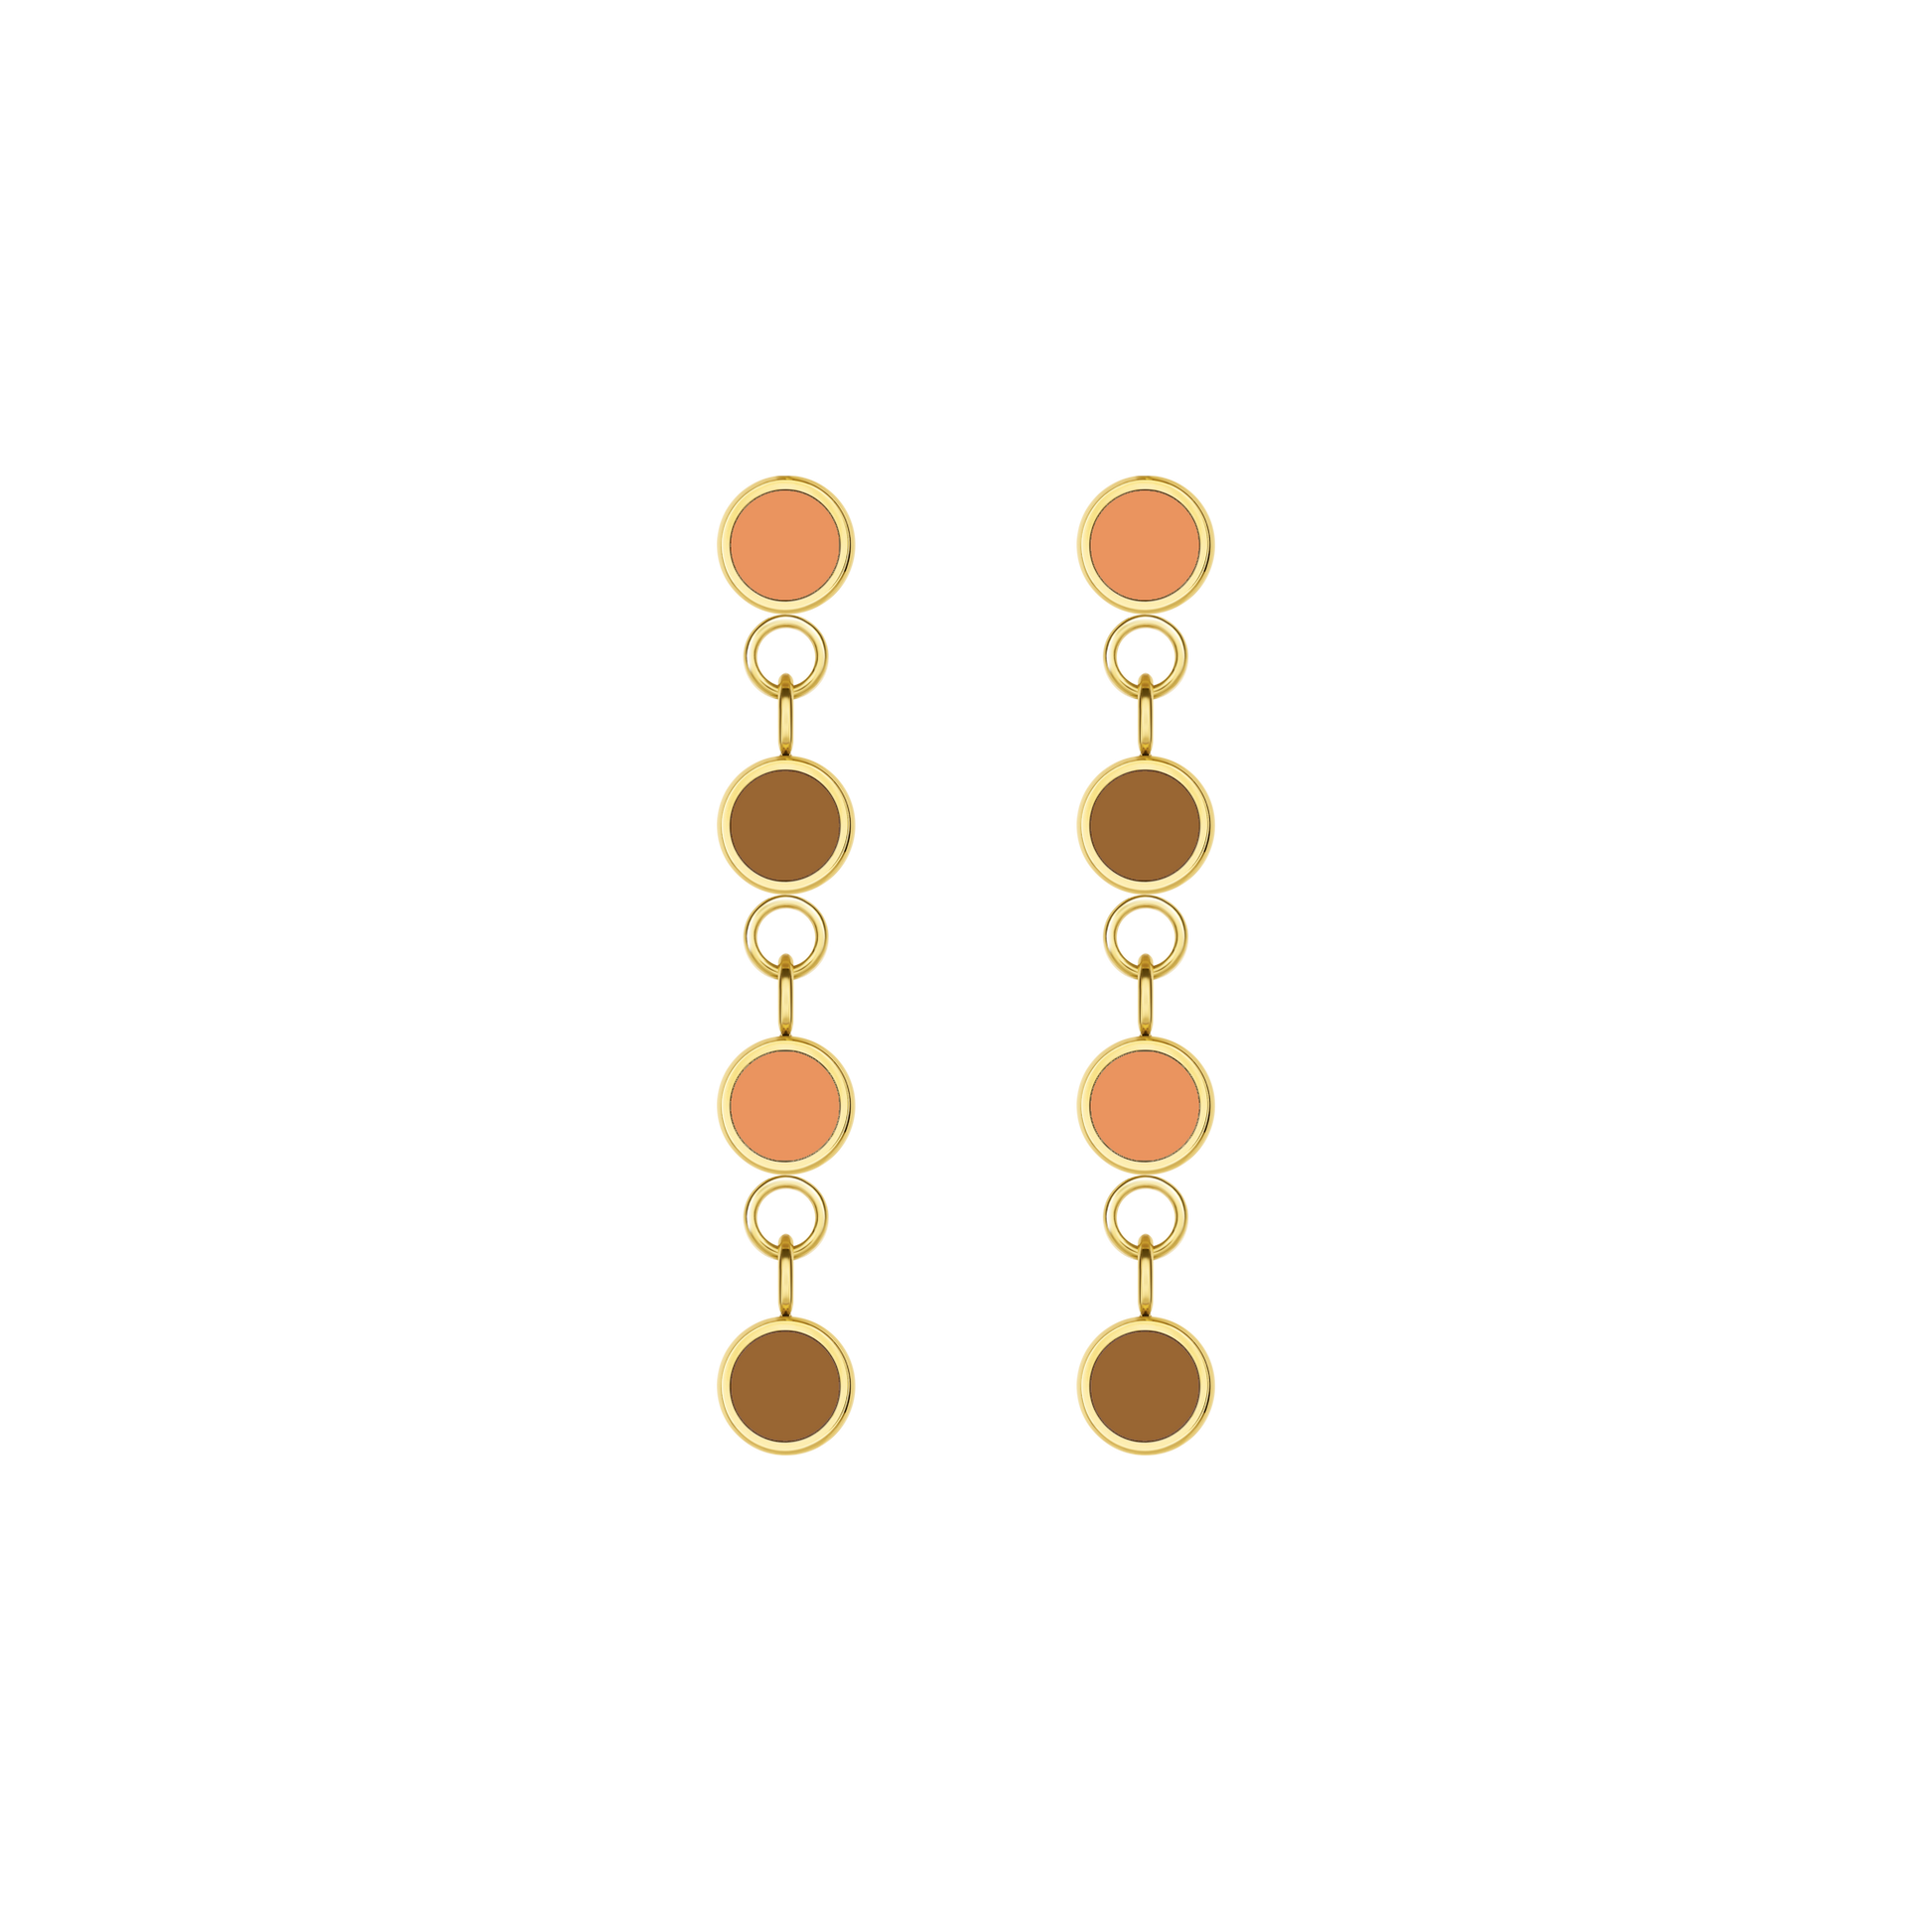 NEW WAVE CASCADE 4 APRICOT CRUSH AND NUTSHELL CHIPS EARRING